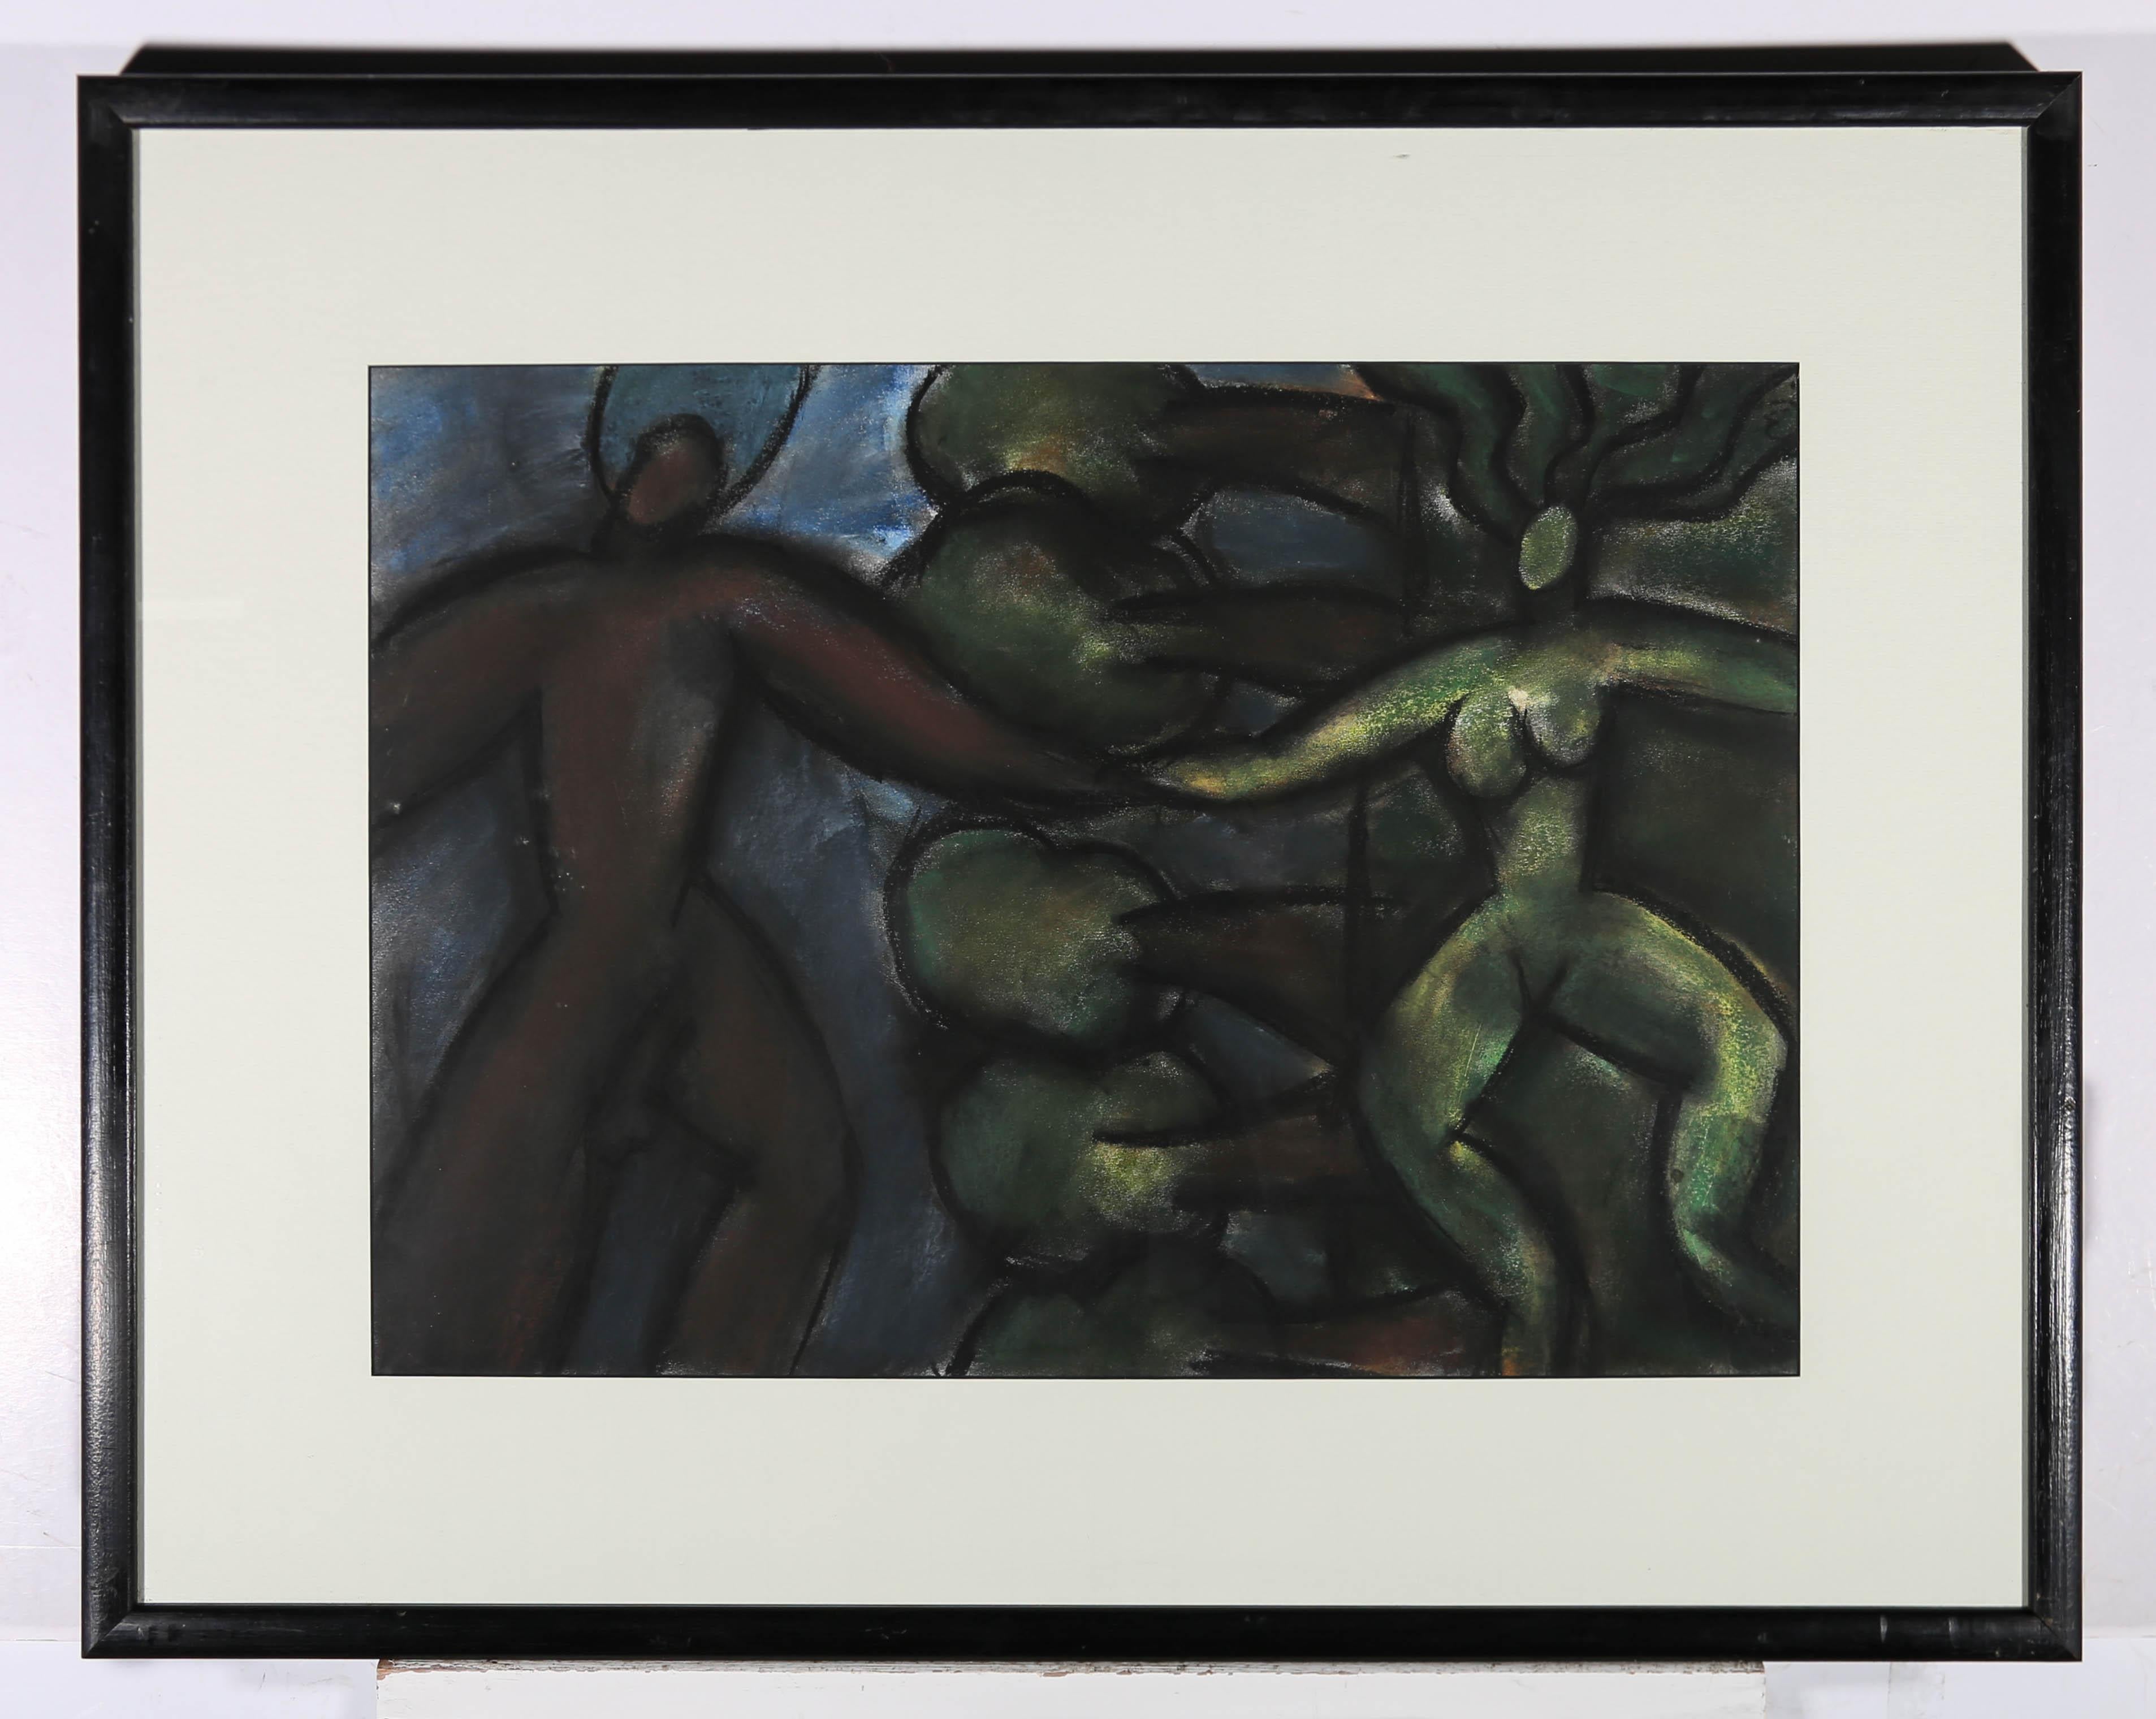 A striking and dramatic 20th Century pastel drawing, showing two dark figures, one a woman with flowing hair, the other a man with a halo, both floating high up in the treetops, holding hands. The artwork is unsigned and presented in a simple black